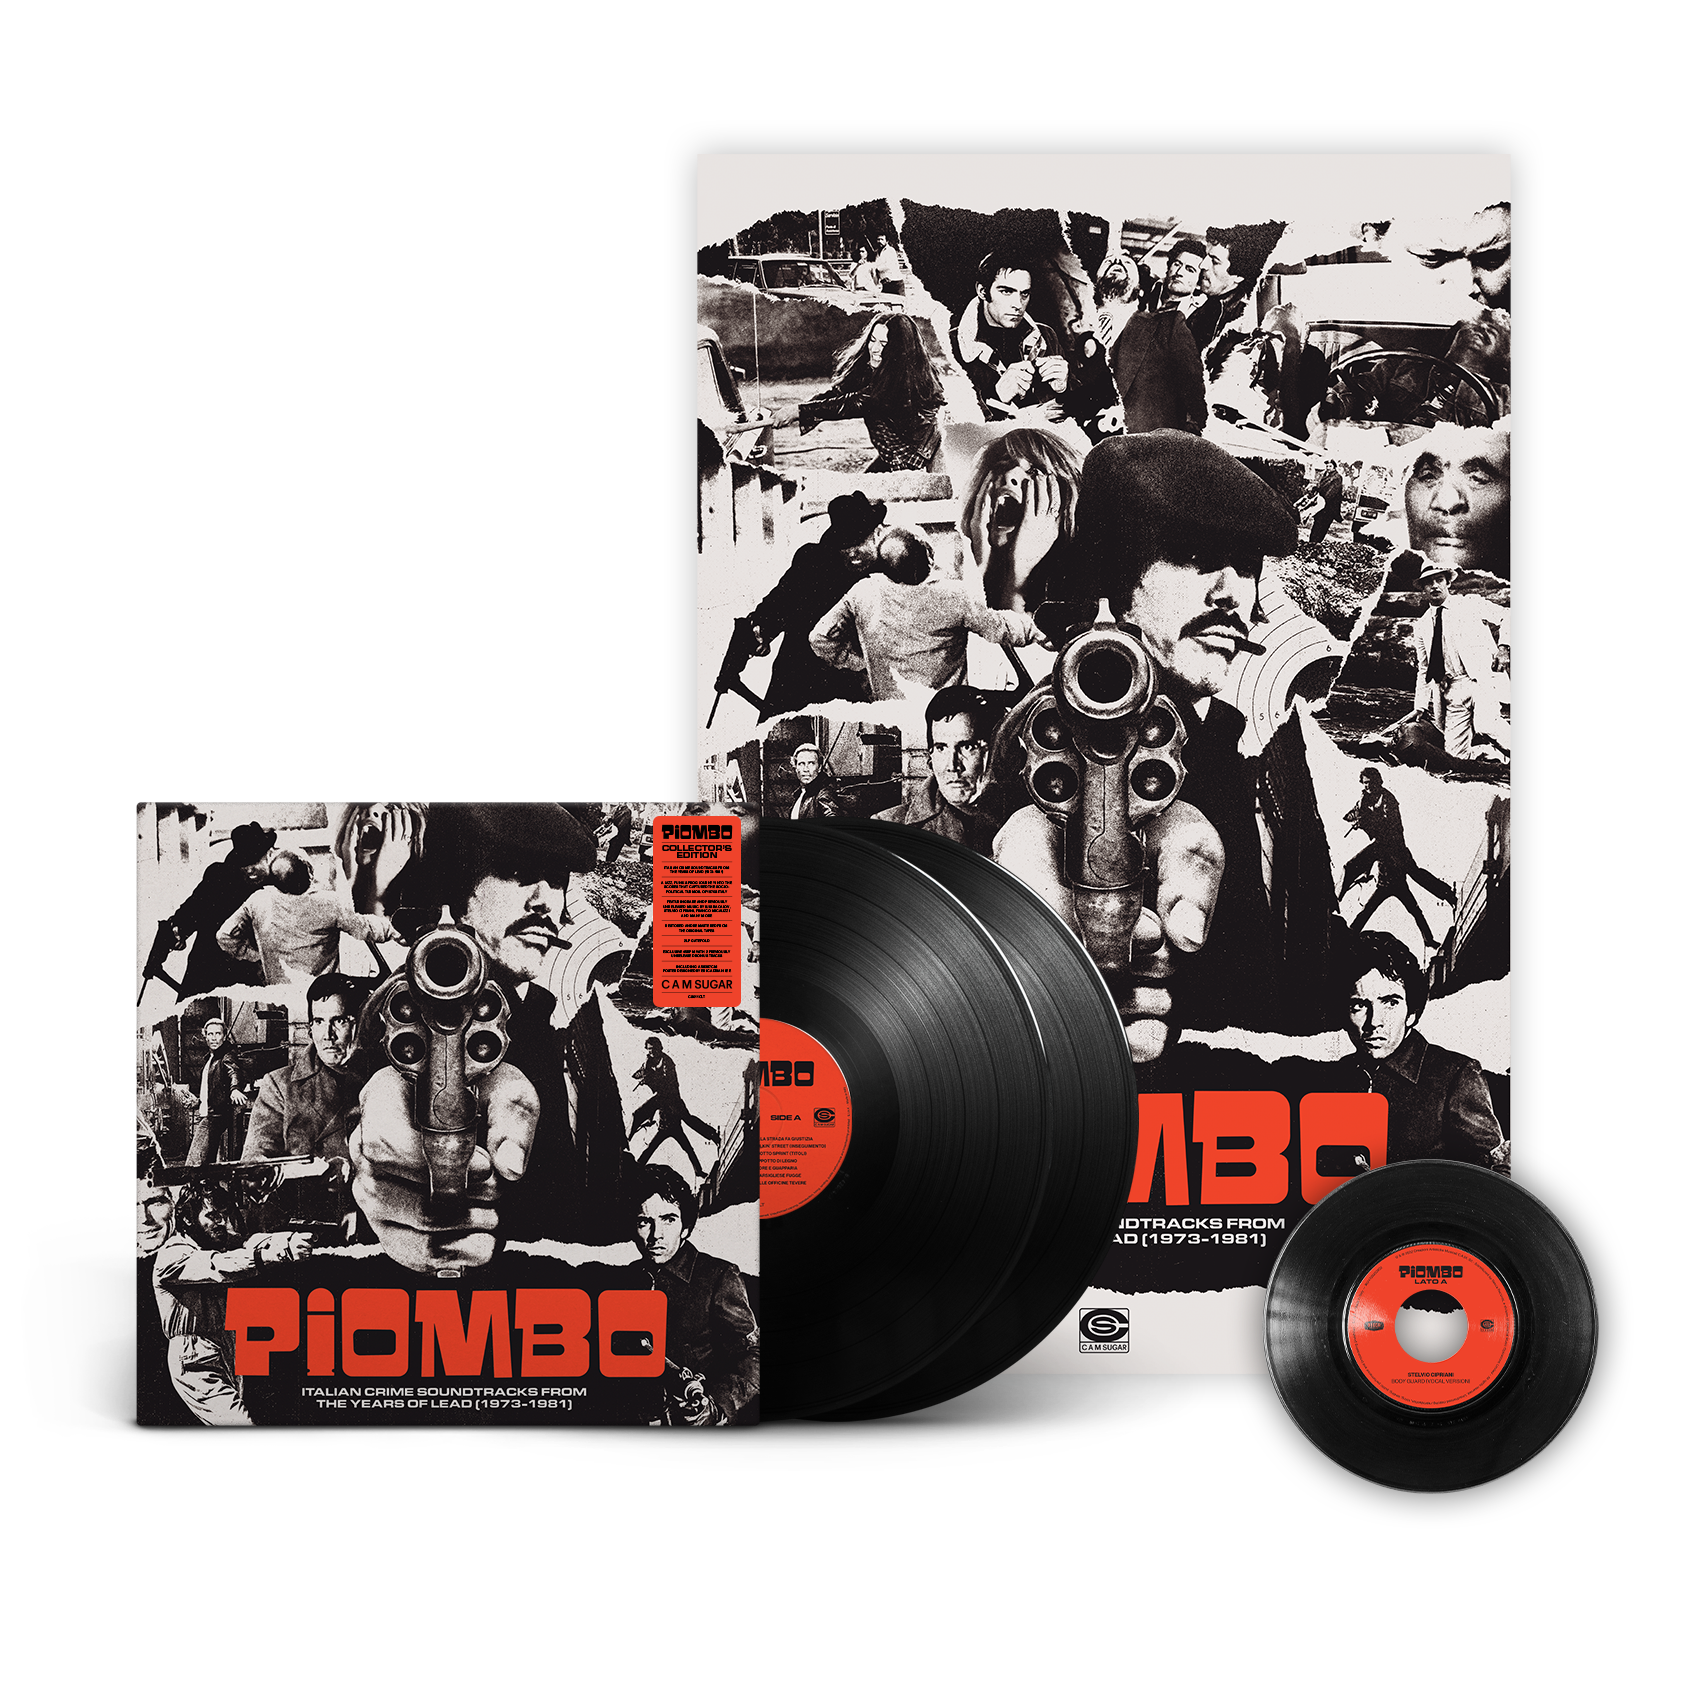 Piombo (Collector's Edition) (3LP) with Poster Complete